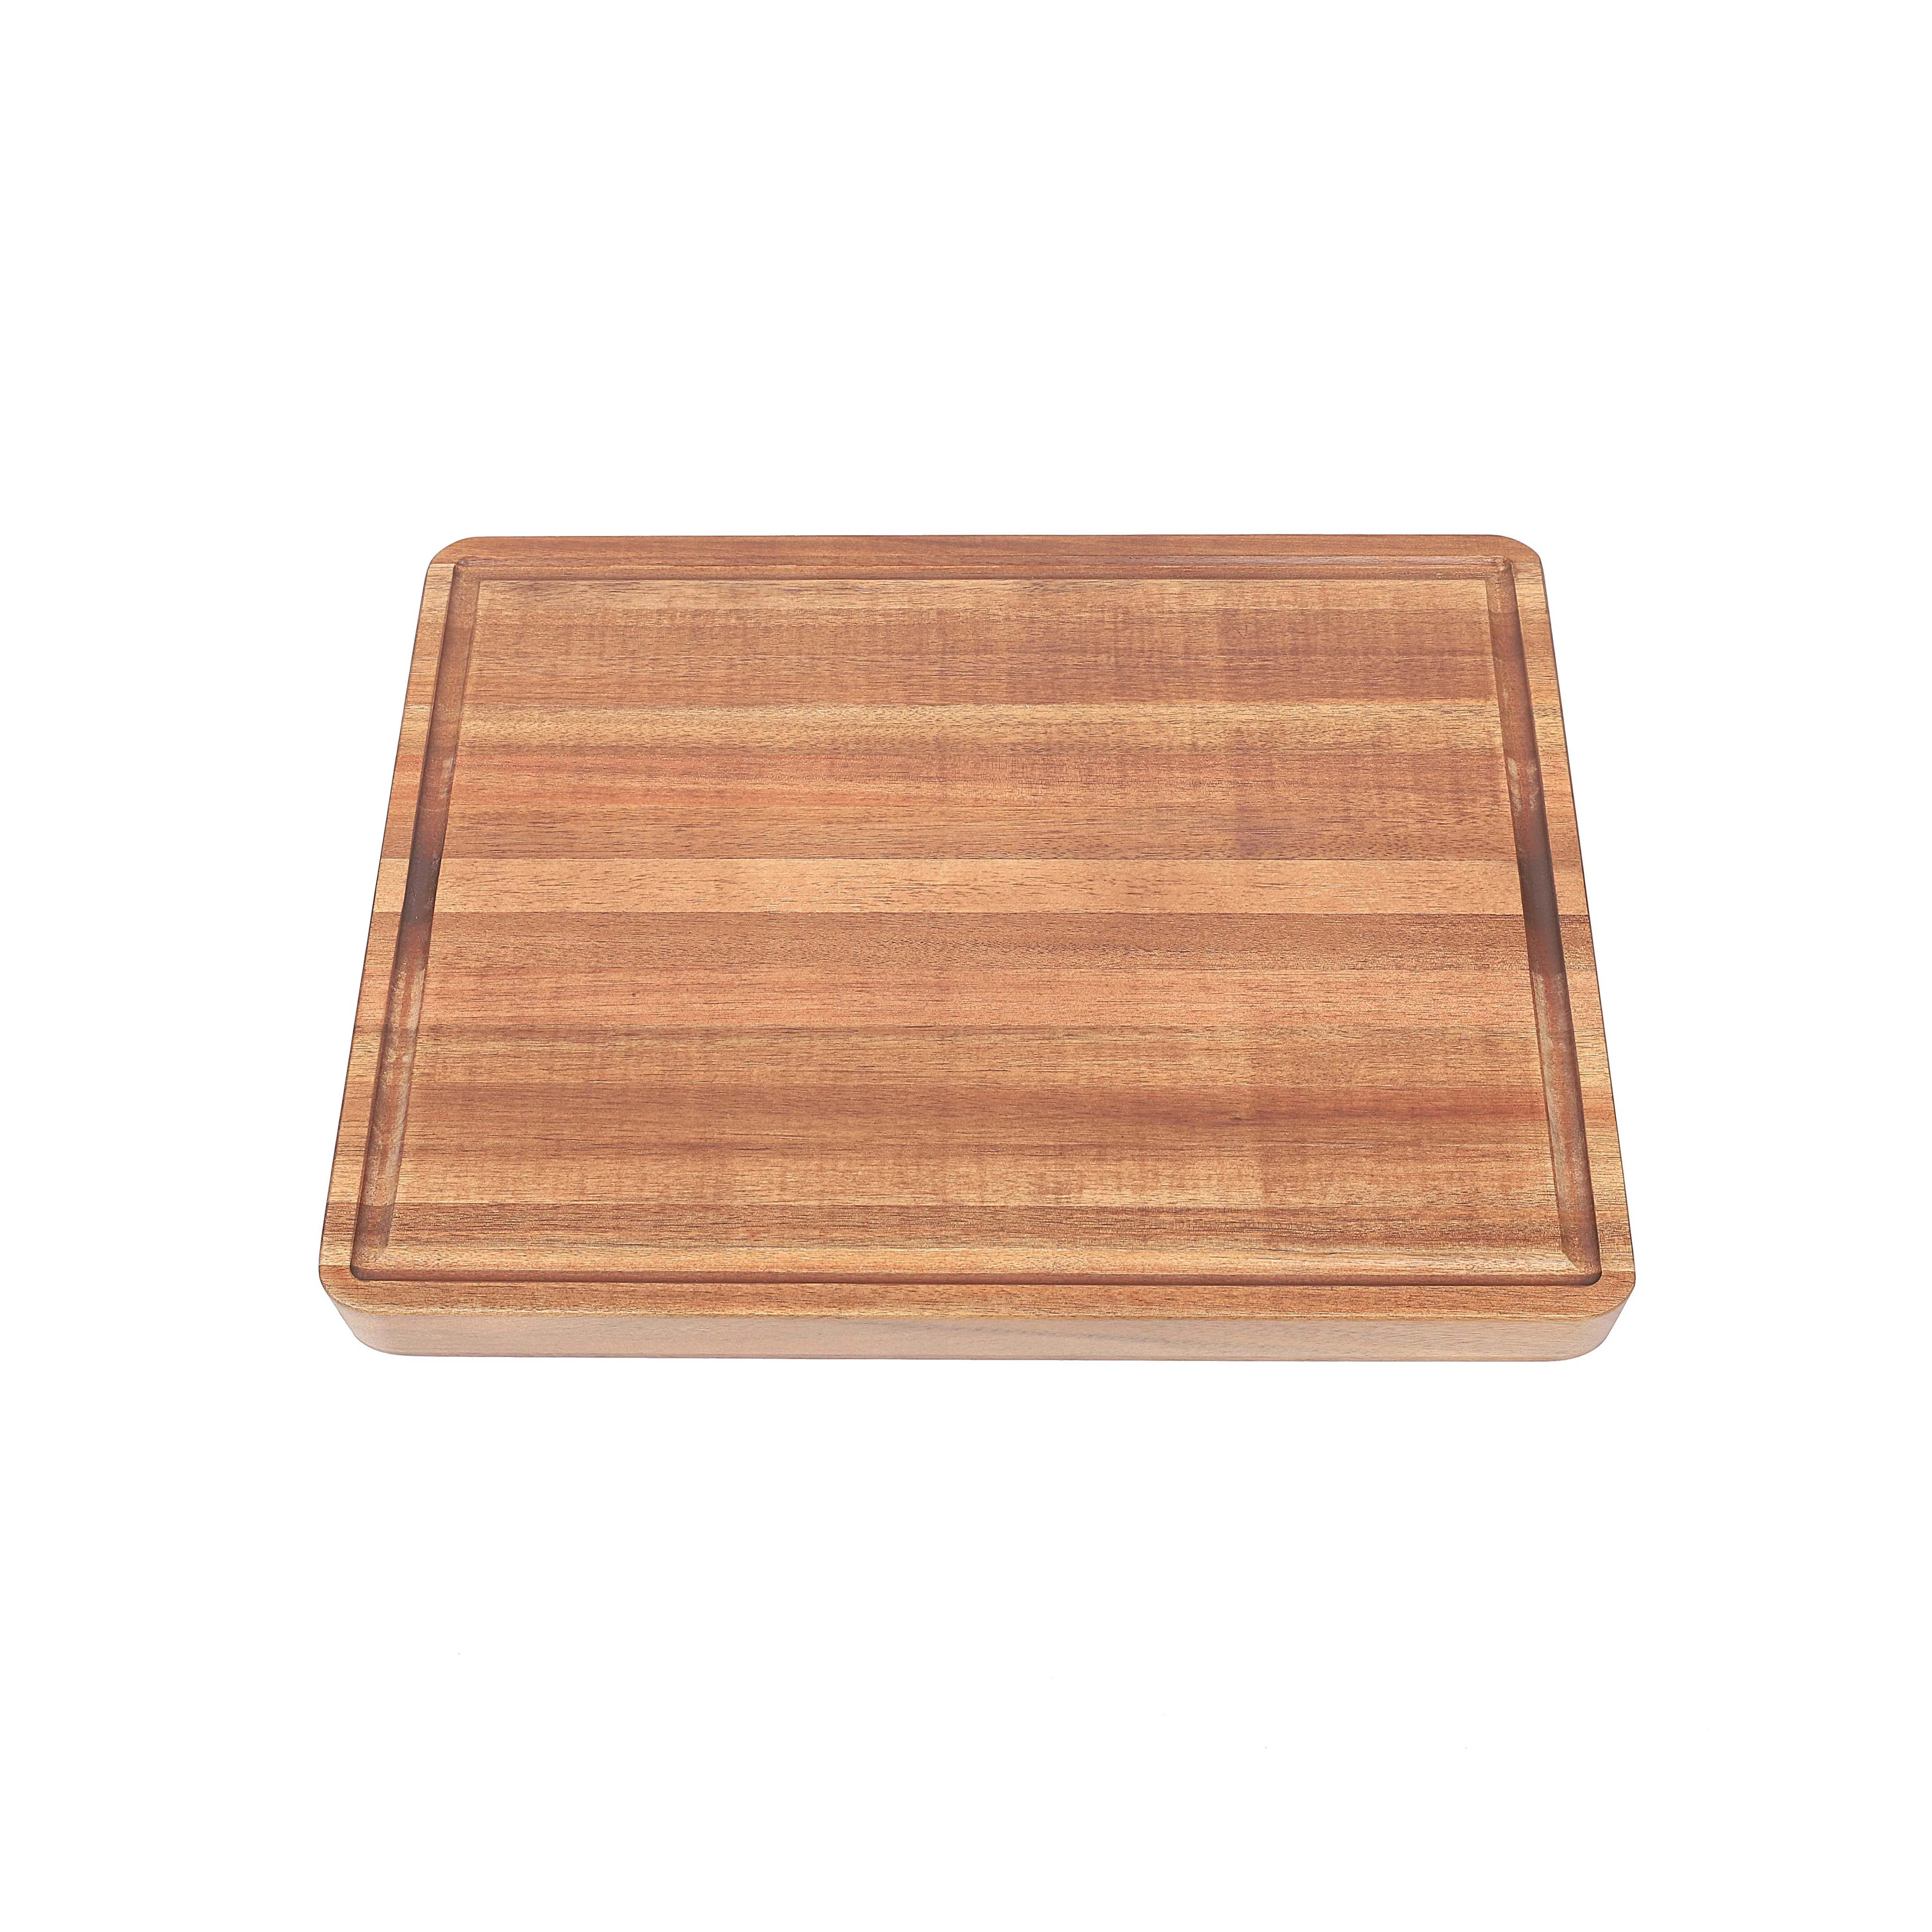 Acacia Wood Cutting Board Reversible Serving Chopping Butcher Block with Juice Groove